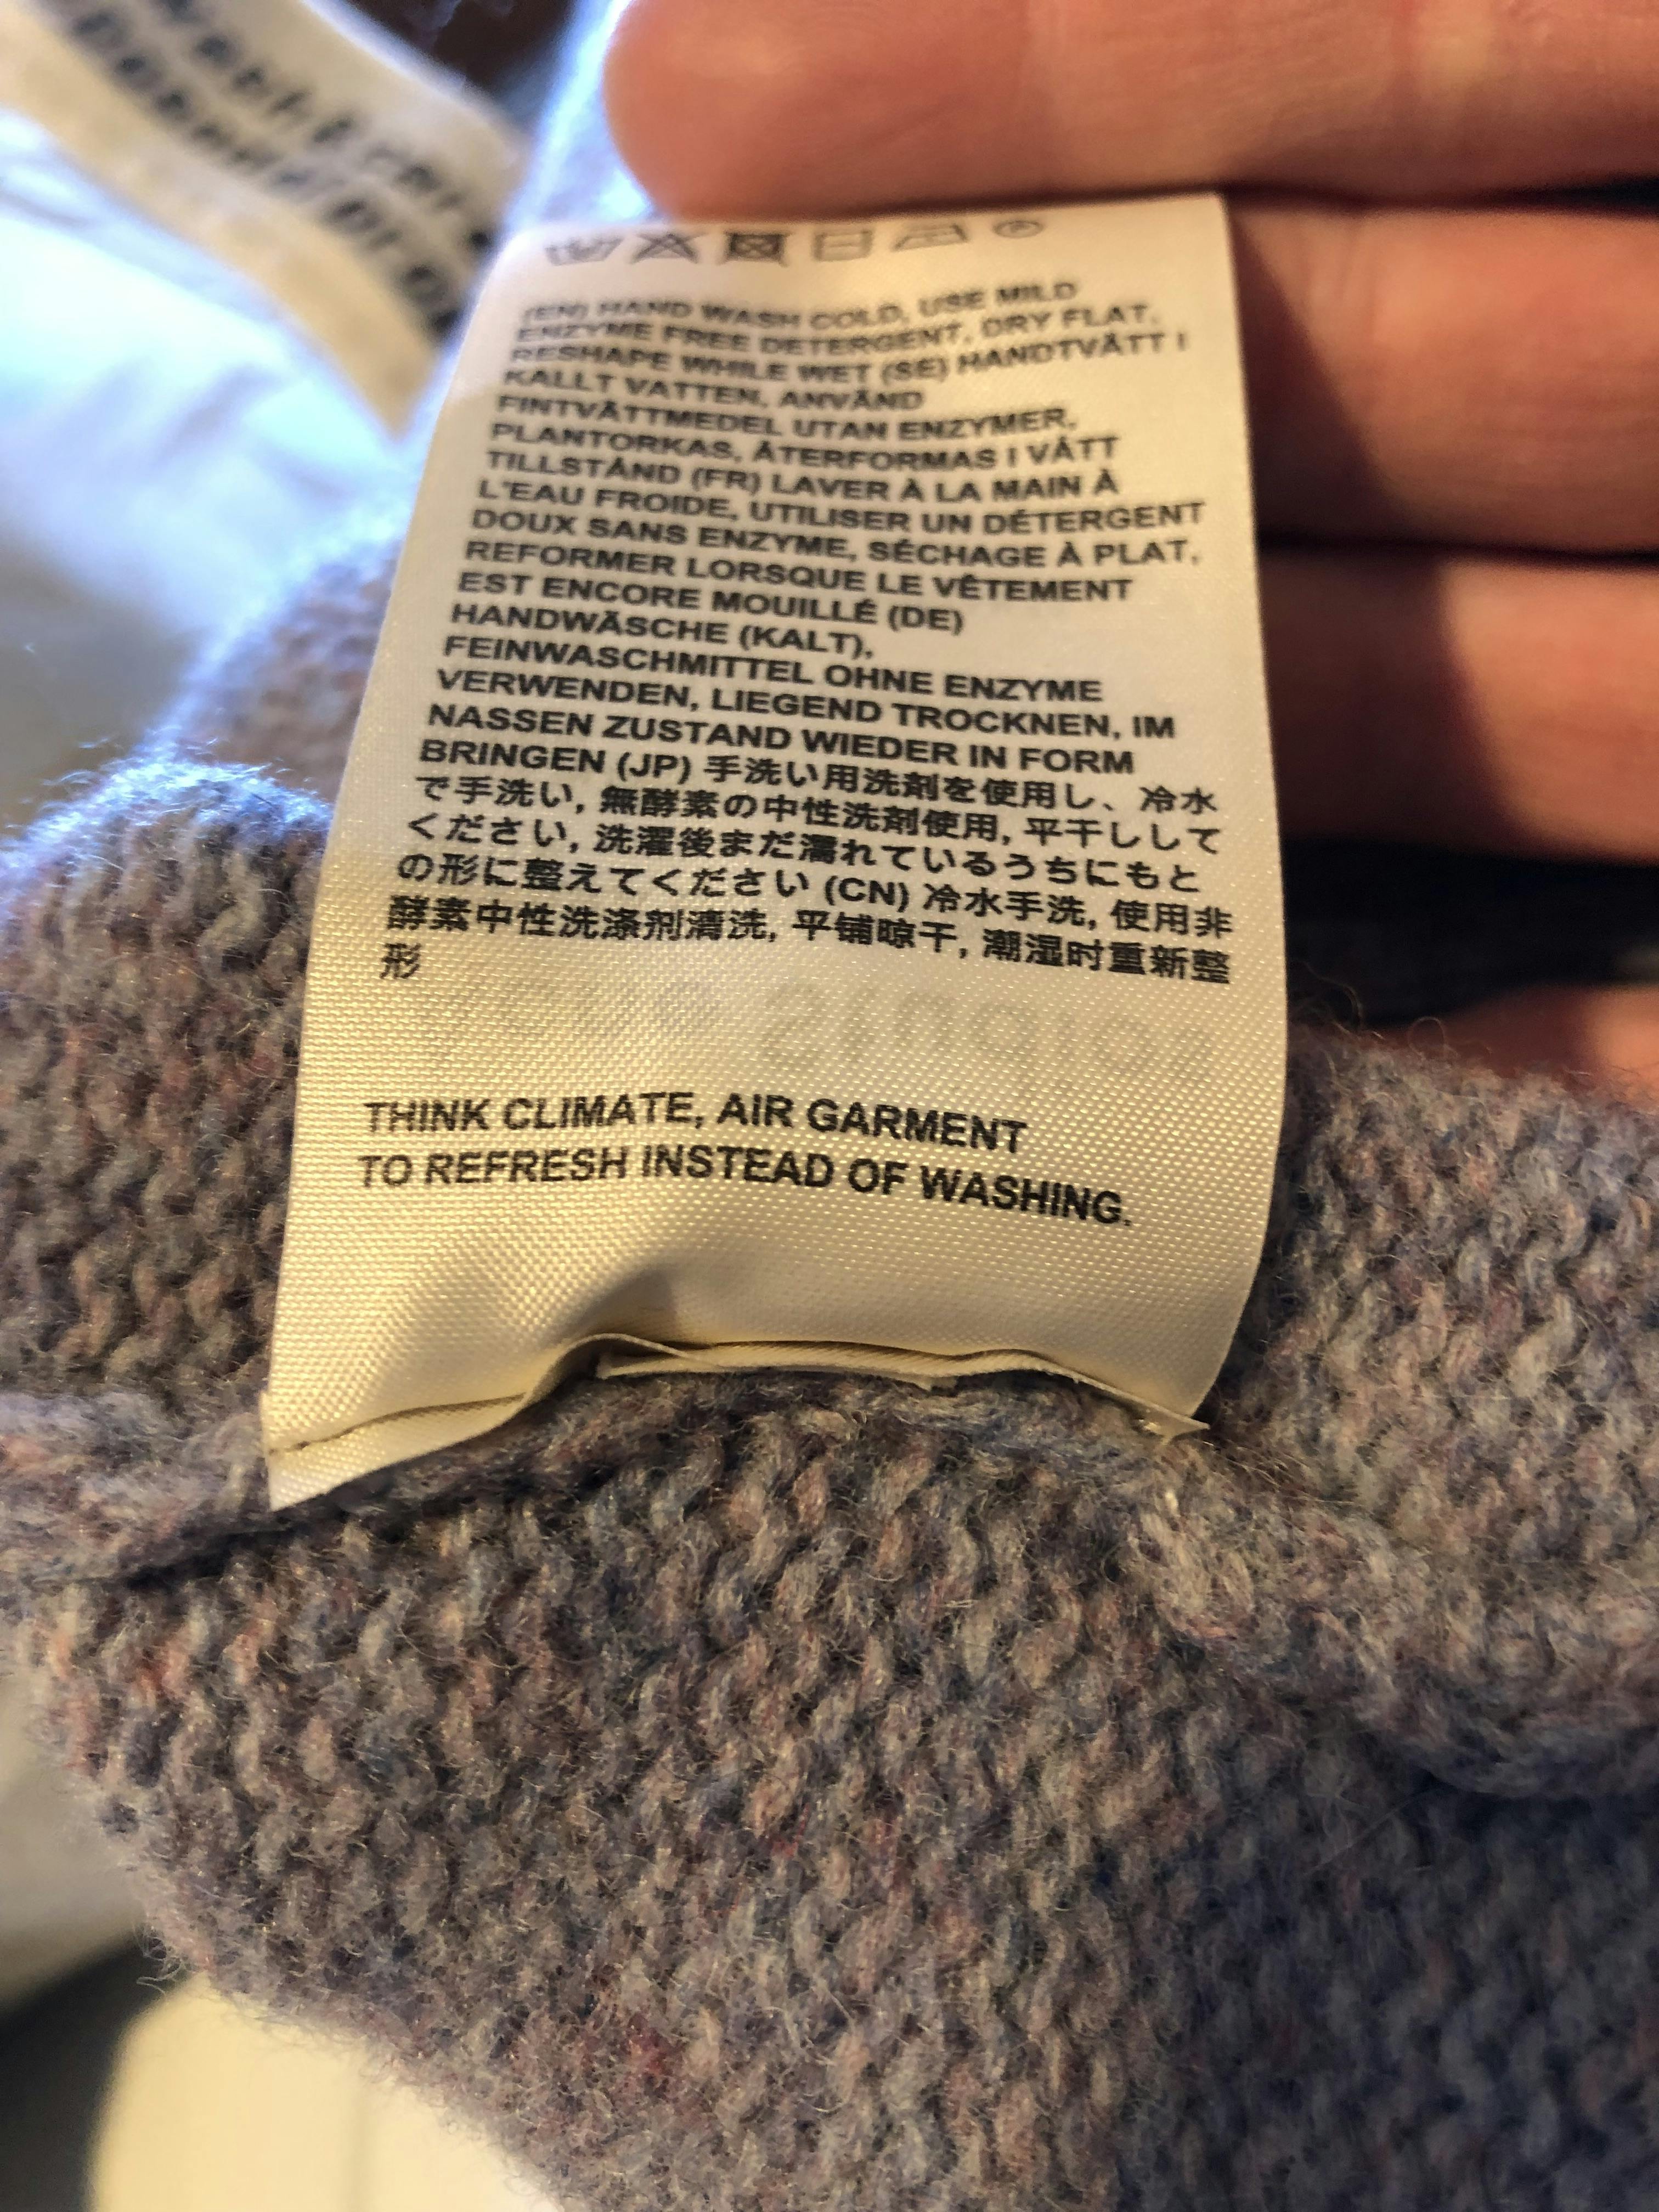  text from a care label made with custom text &quot;Think climate. Air garment to refresh instead of washing.&quot;